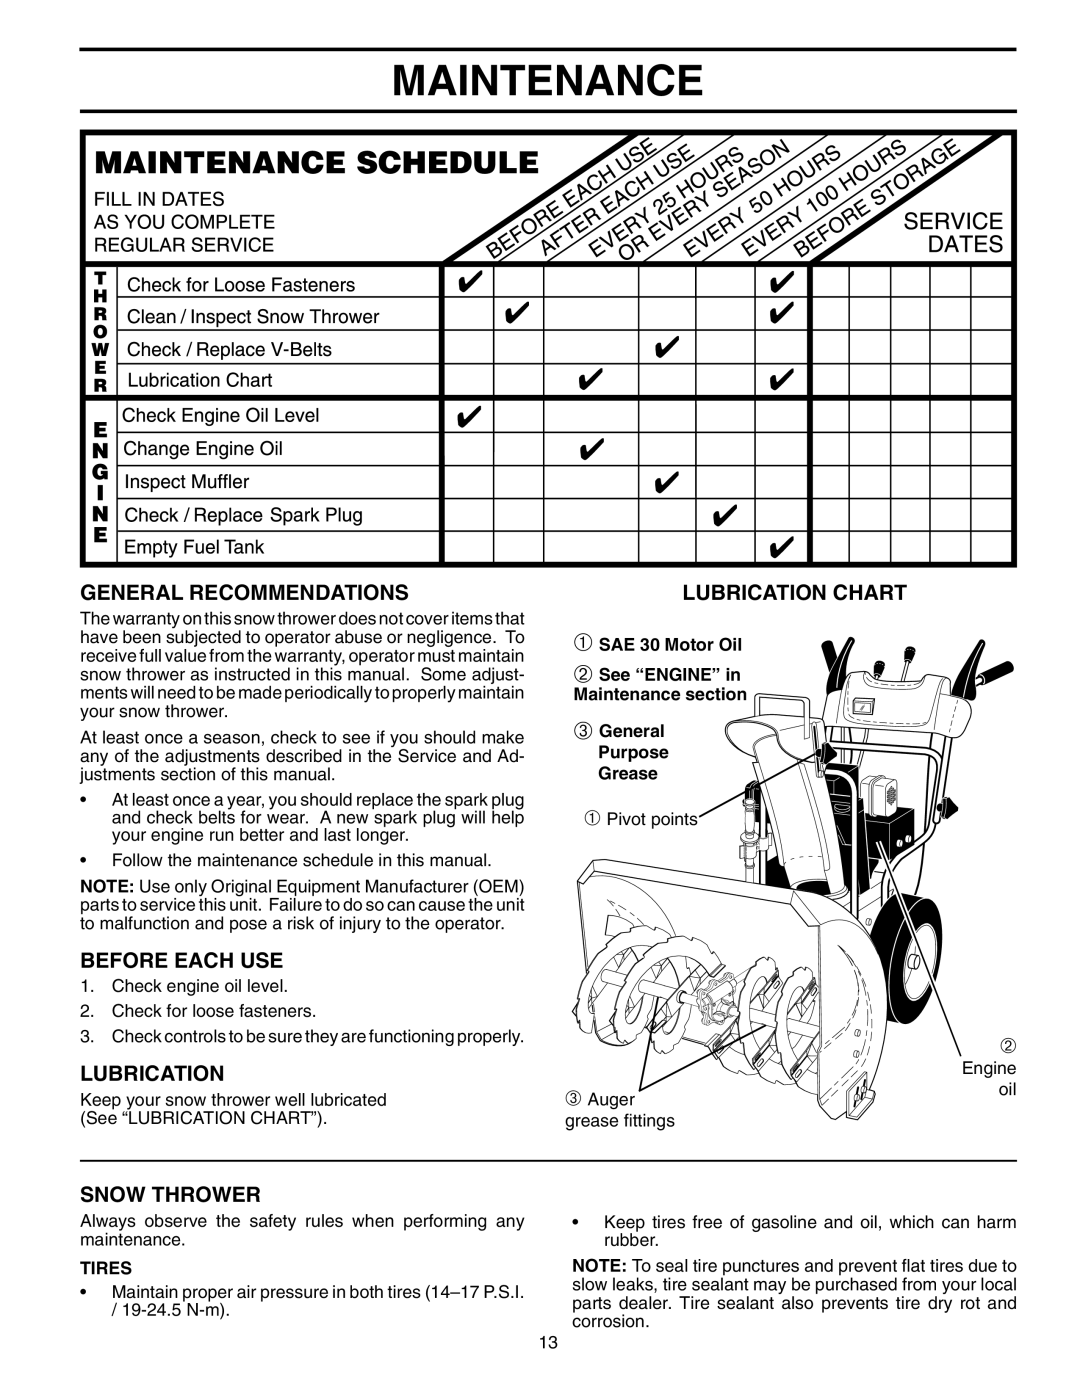 Husqvarna 924SBE Maintenance, General Recommendations, Before Each Use, Snow Thrower, Lubrication Chart, Tires 